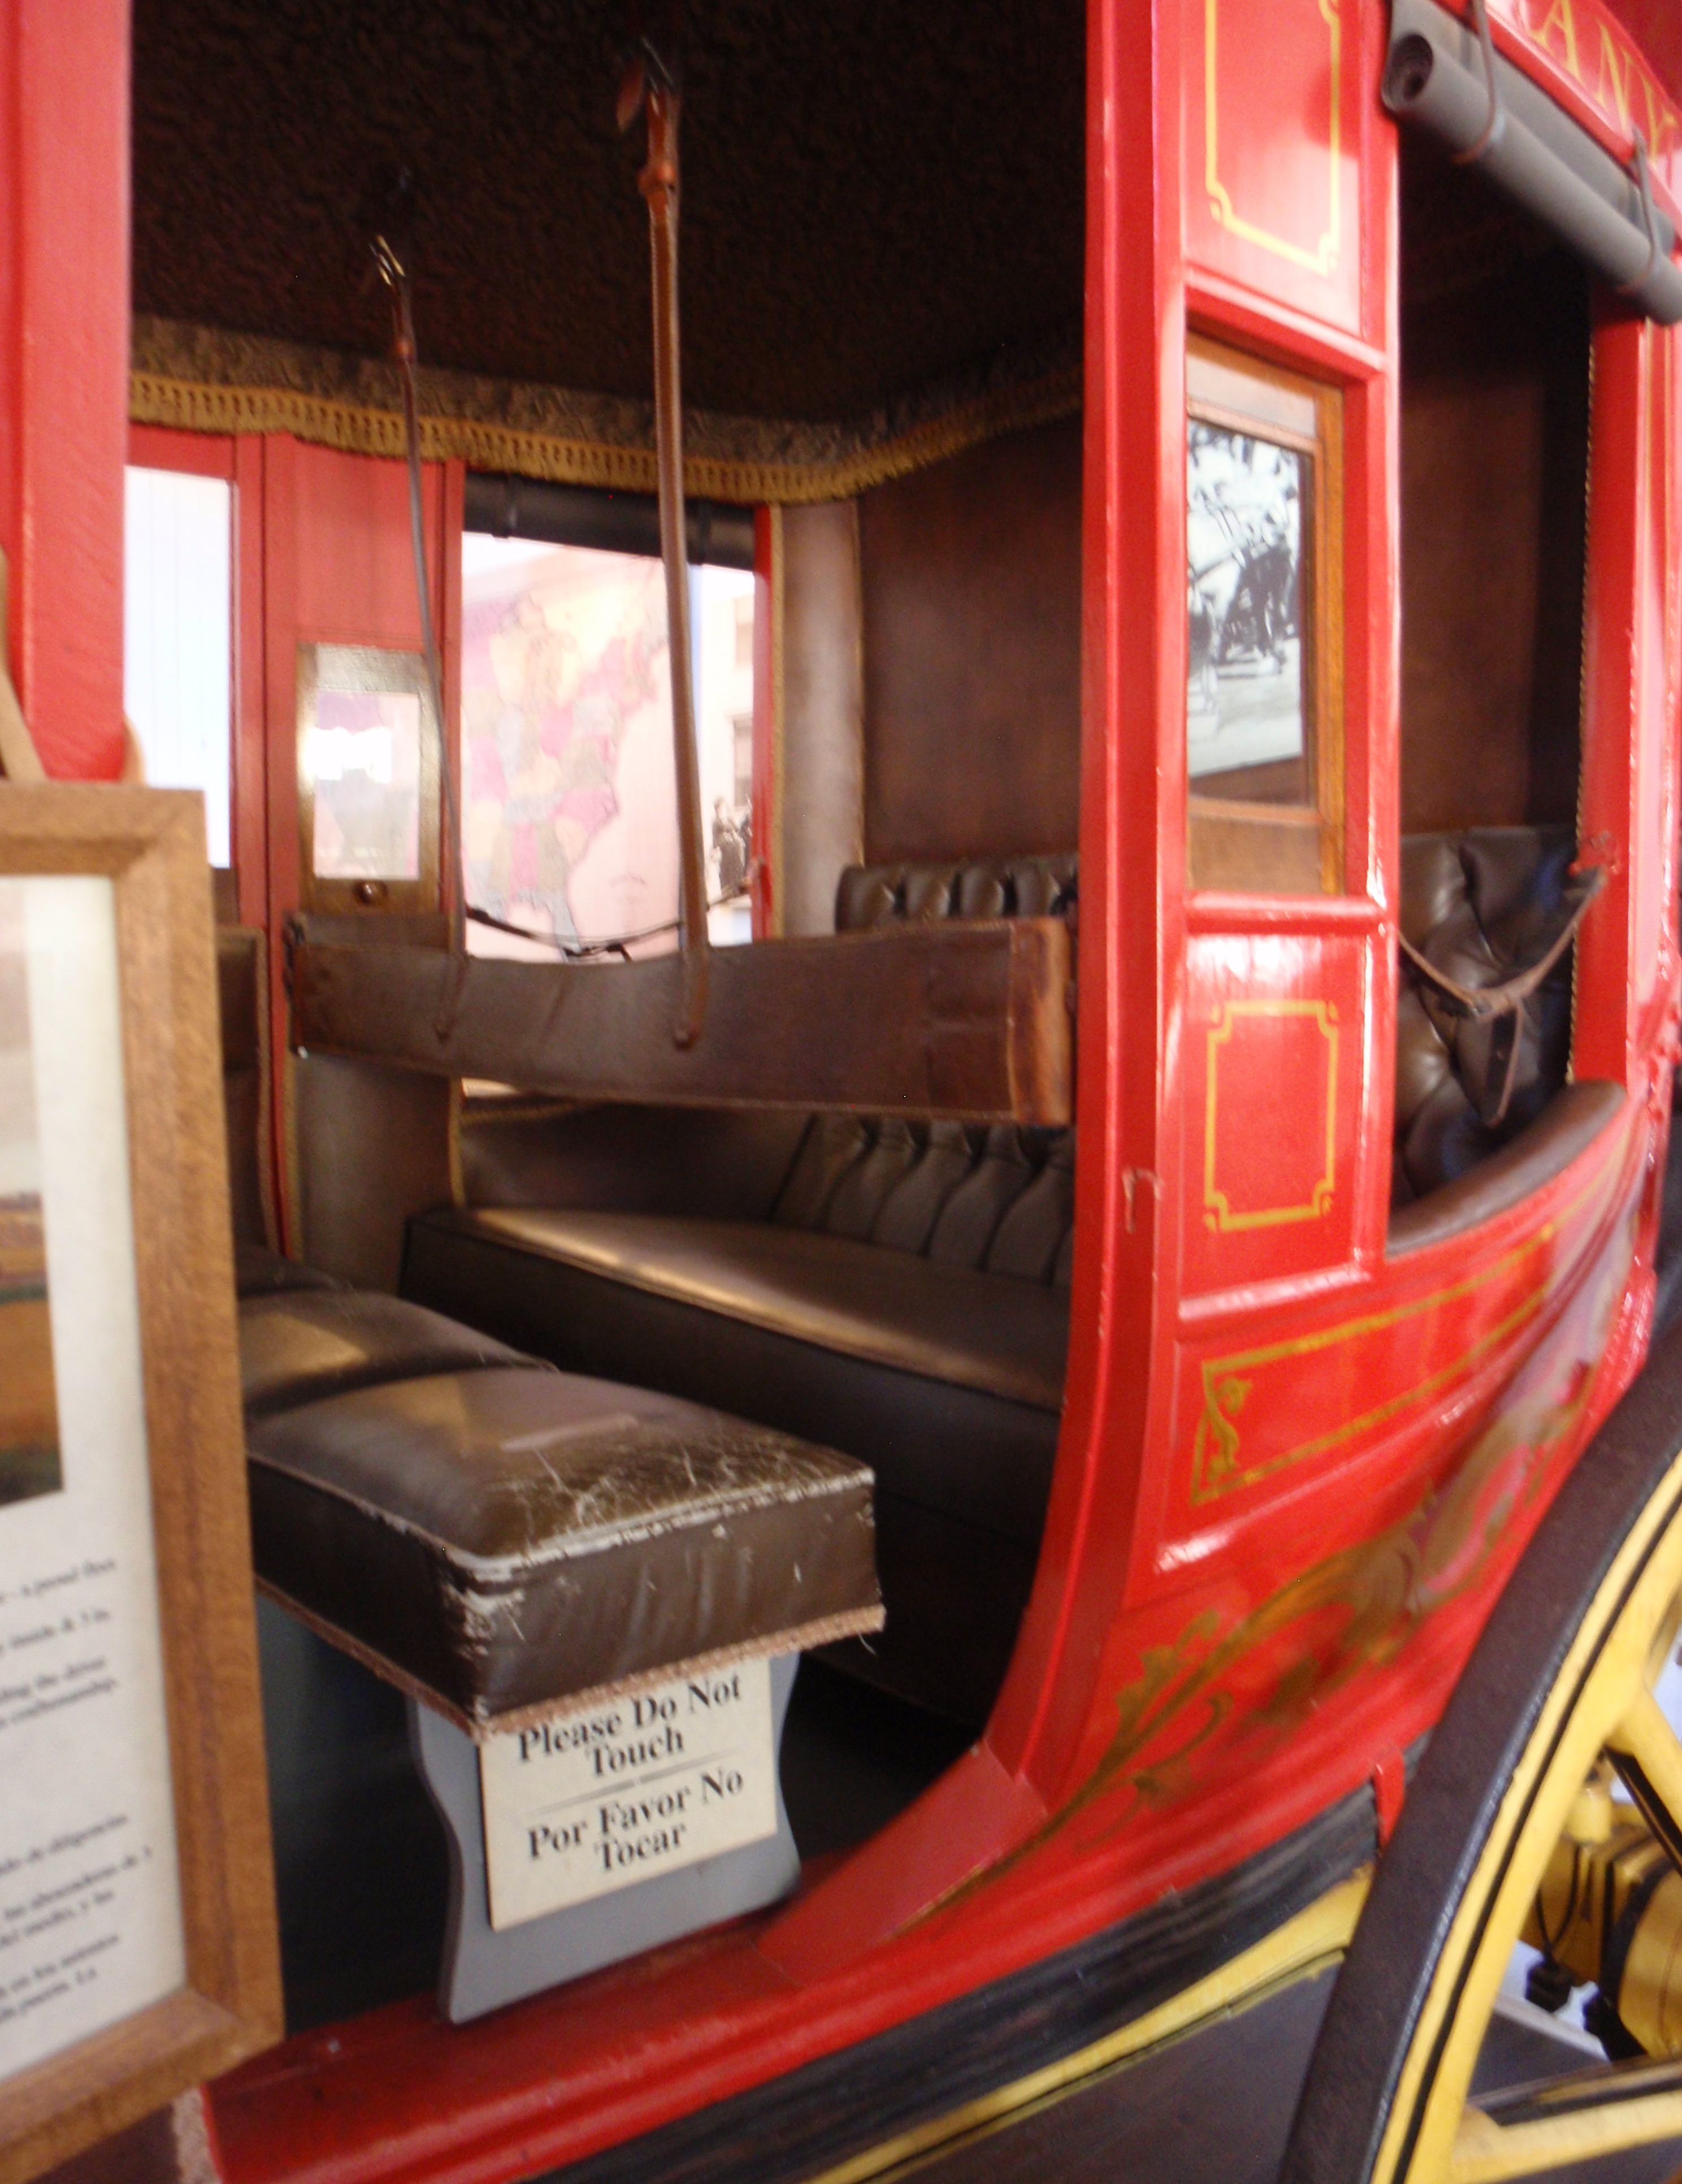 Interior of Concord coach. Imagine sharing that bench with two other passengers for the 24 day run from St Louis to San Diego. October 2016 photo at Wells Fargo's museum in San Diego by James Ulvog.